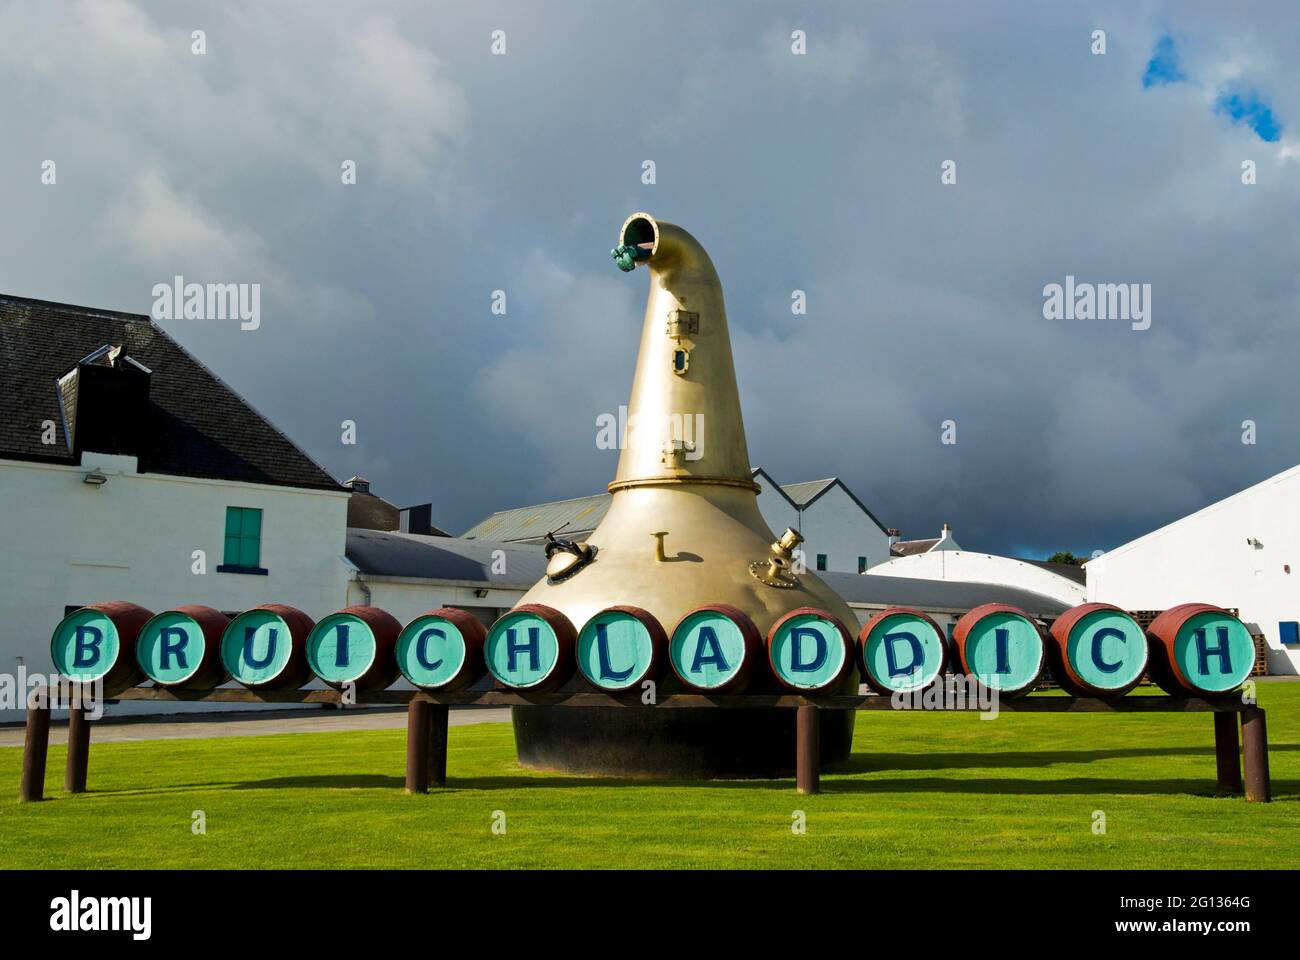 A view of the Bruichladdich Whisky Distillery barrel sign with the old pot still in the background. Stock Photo